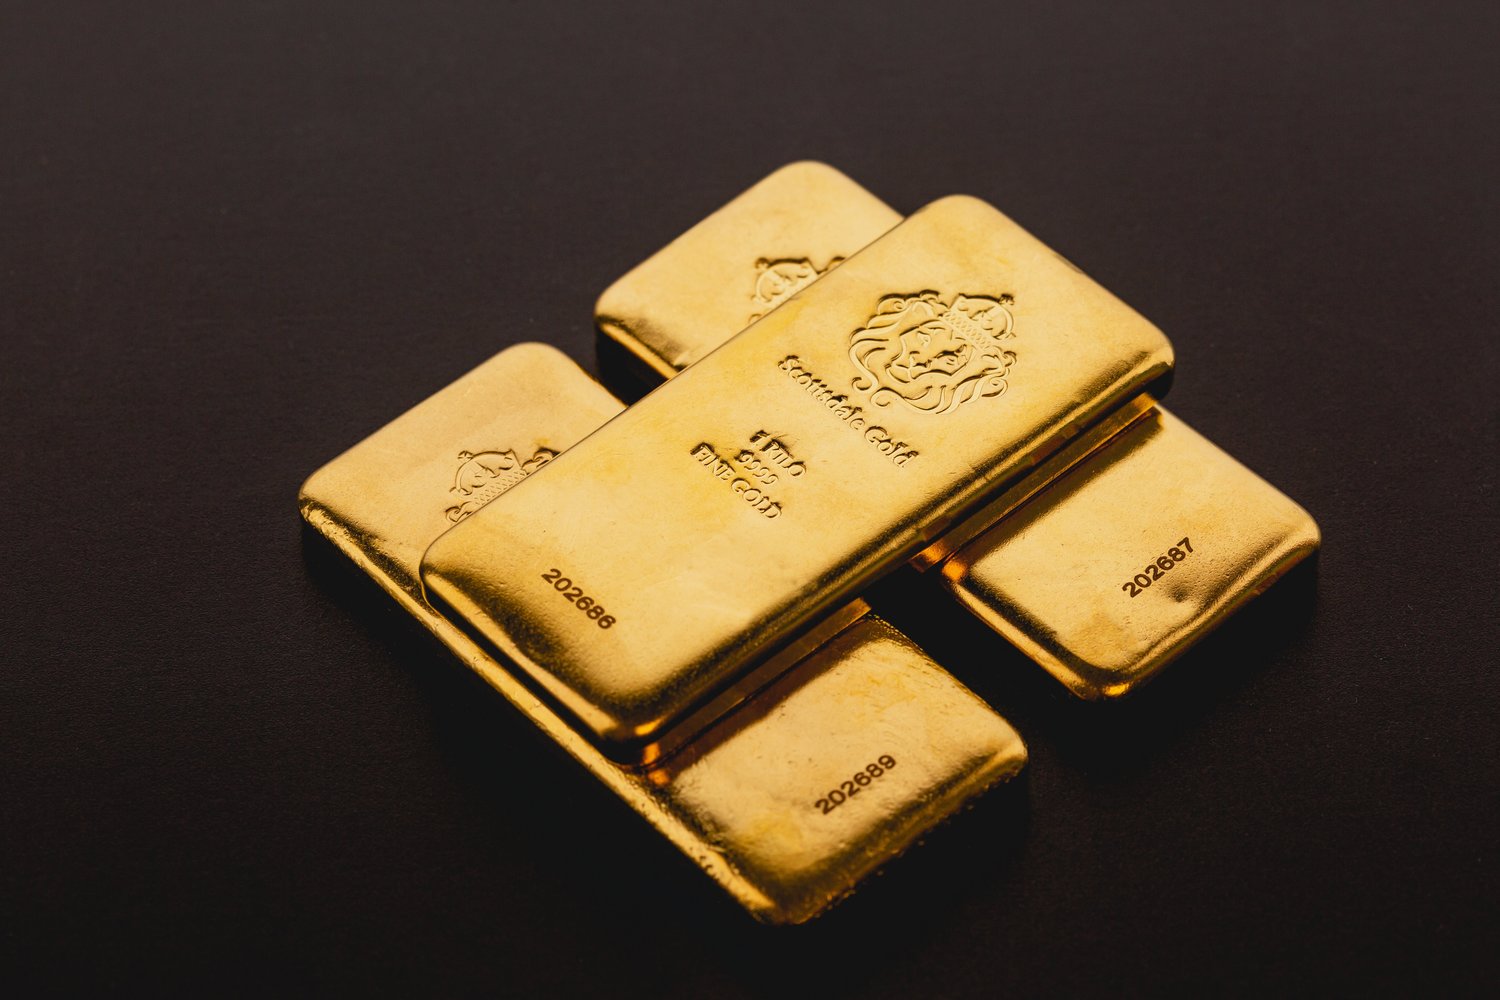 The story of gold is as fascinating as the metal itself.